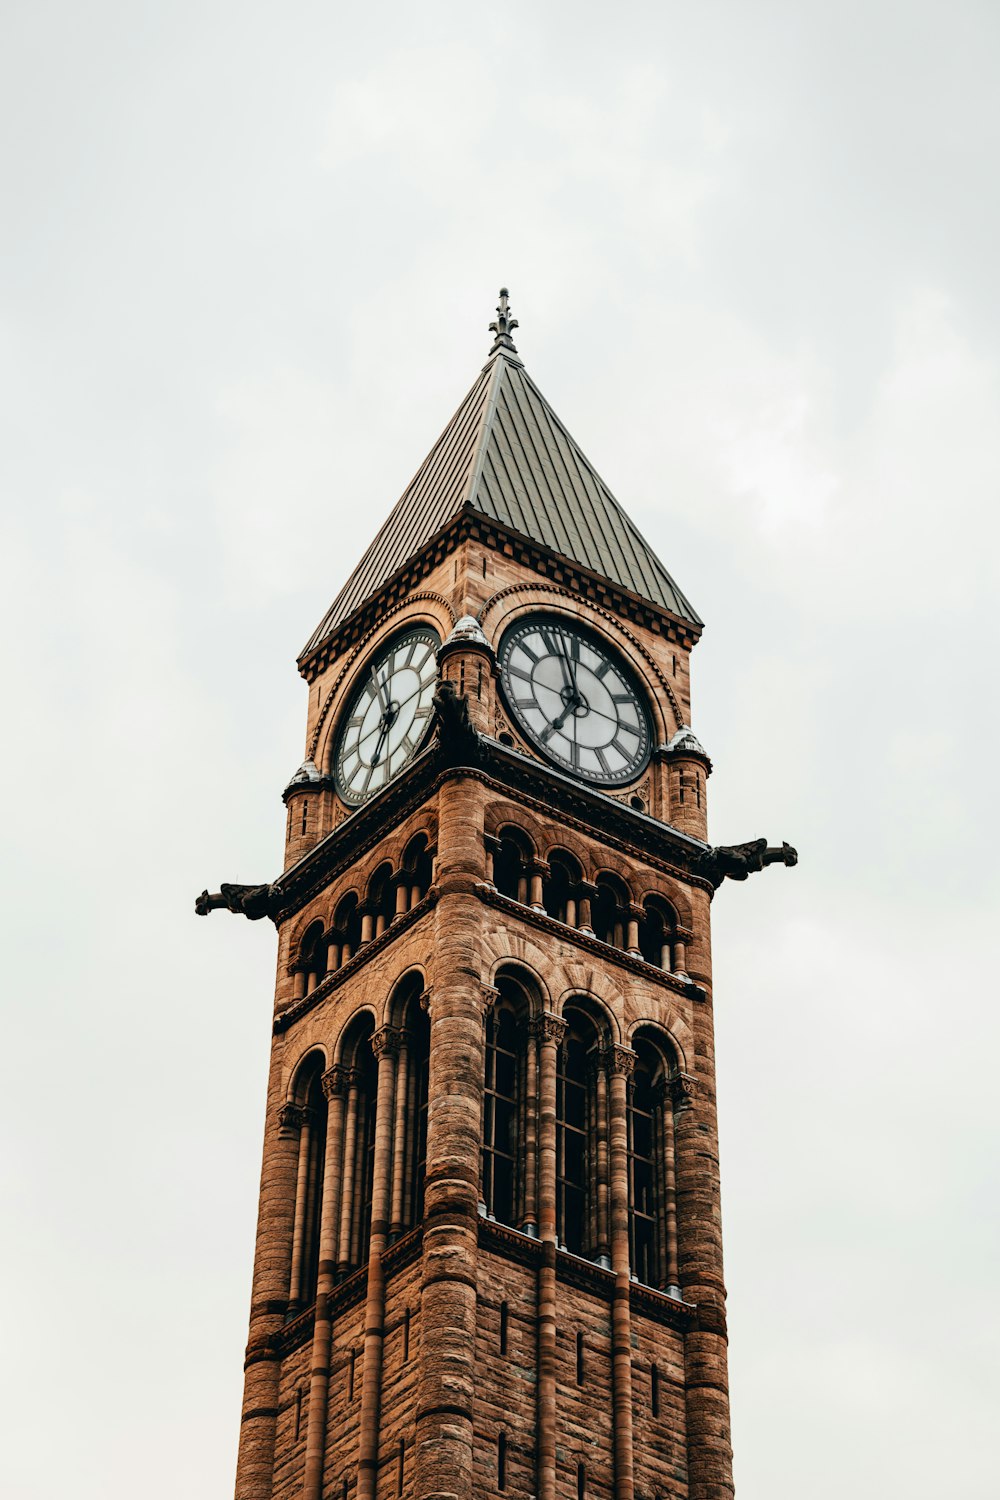 low angle photo of tower with clock